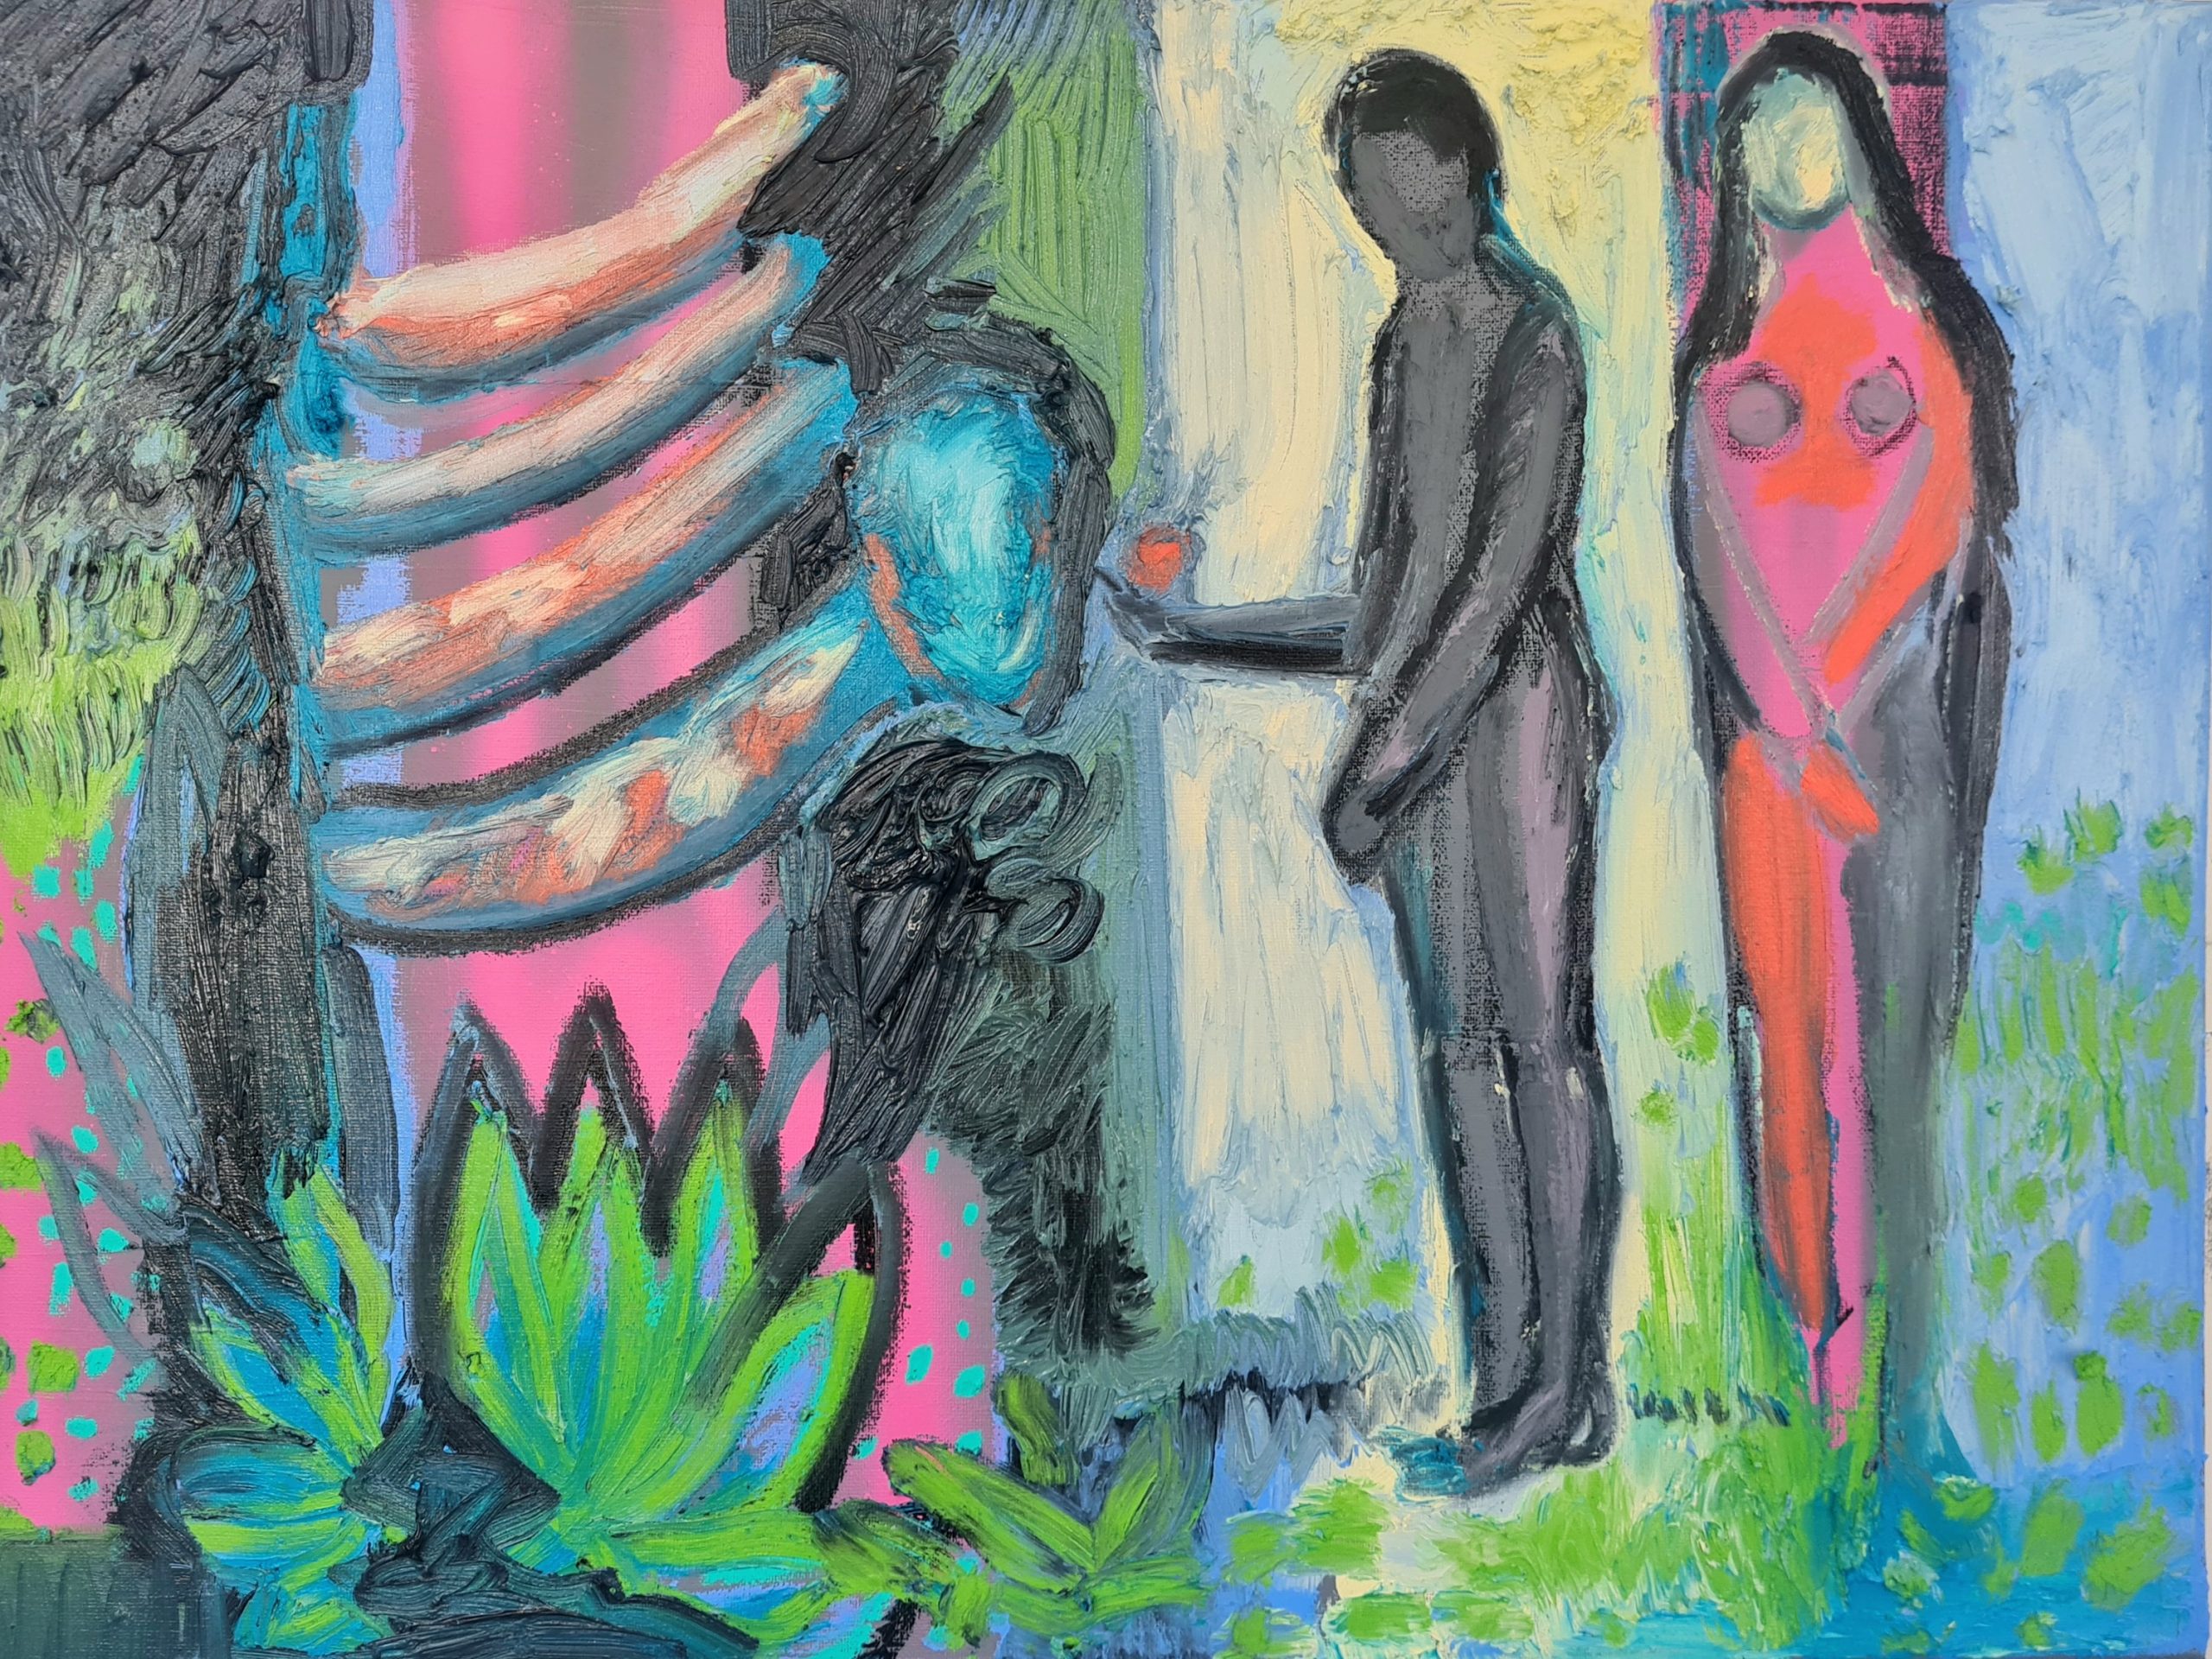 Painting of male and female figure (Adam and Eve inspiration) and a snake on pink bark